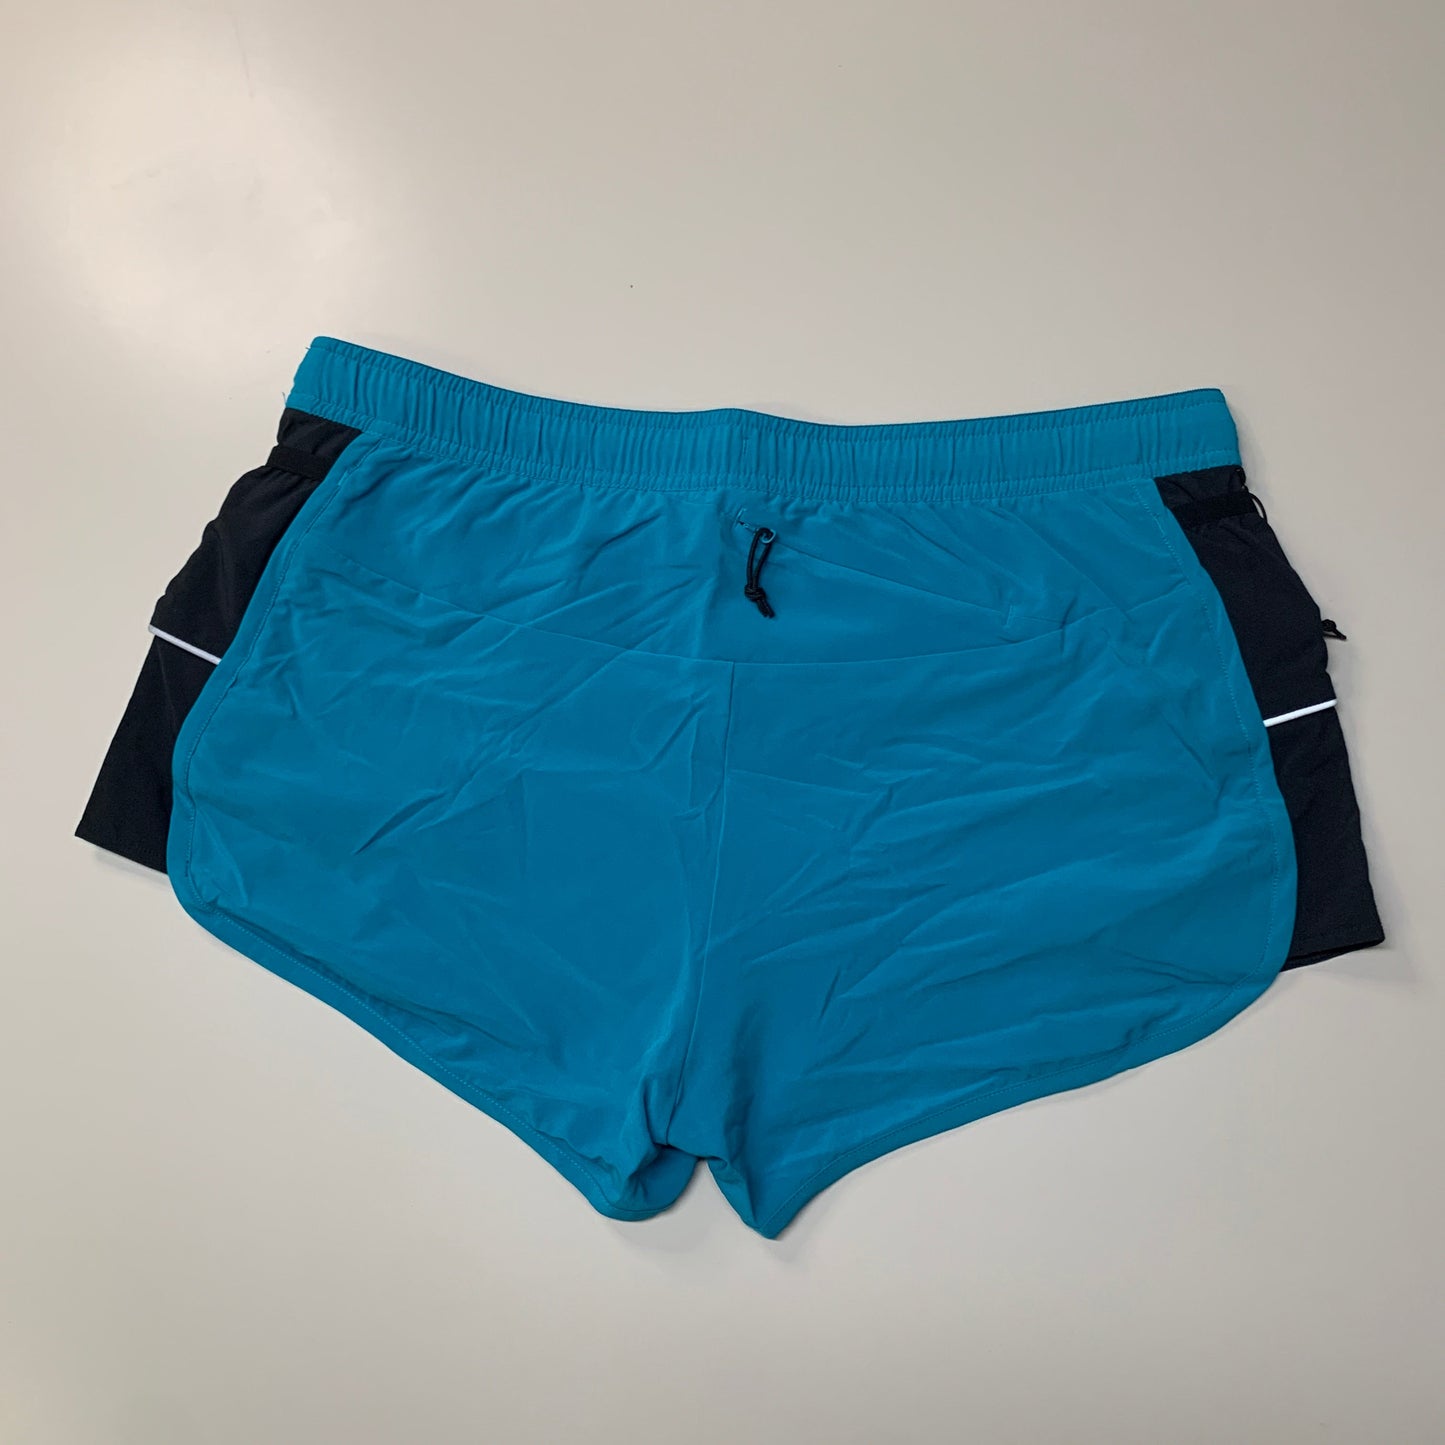 NATHAN Essential Short 2.0 Women's Bright Teal Size S NS51400-60193-S